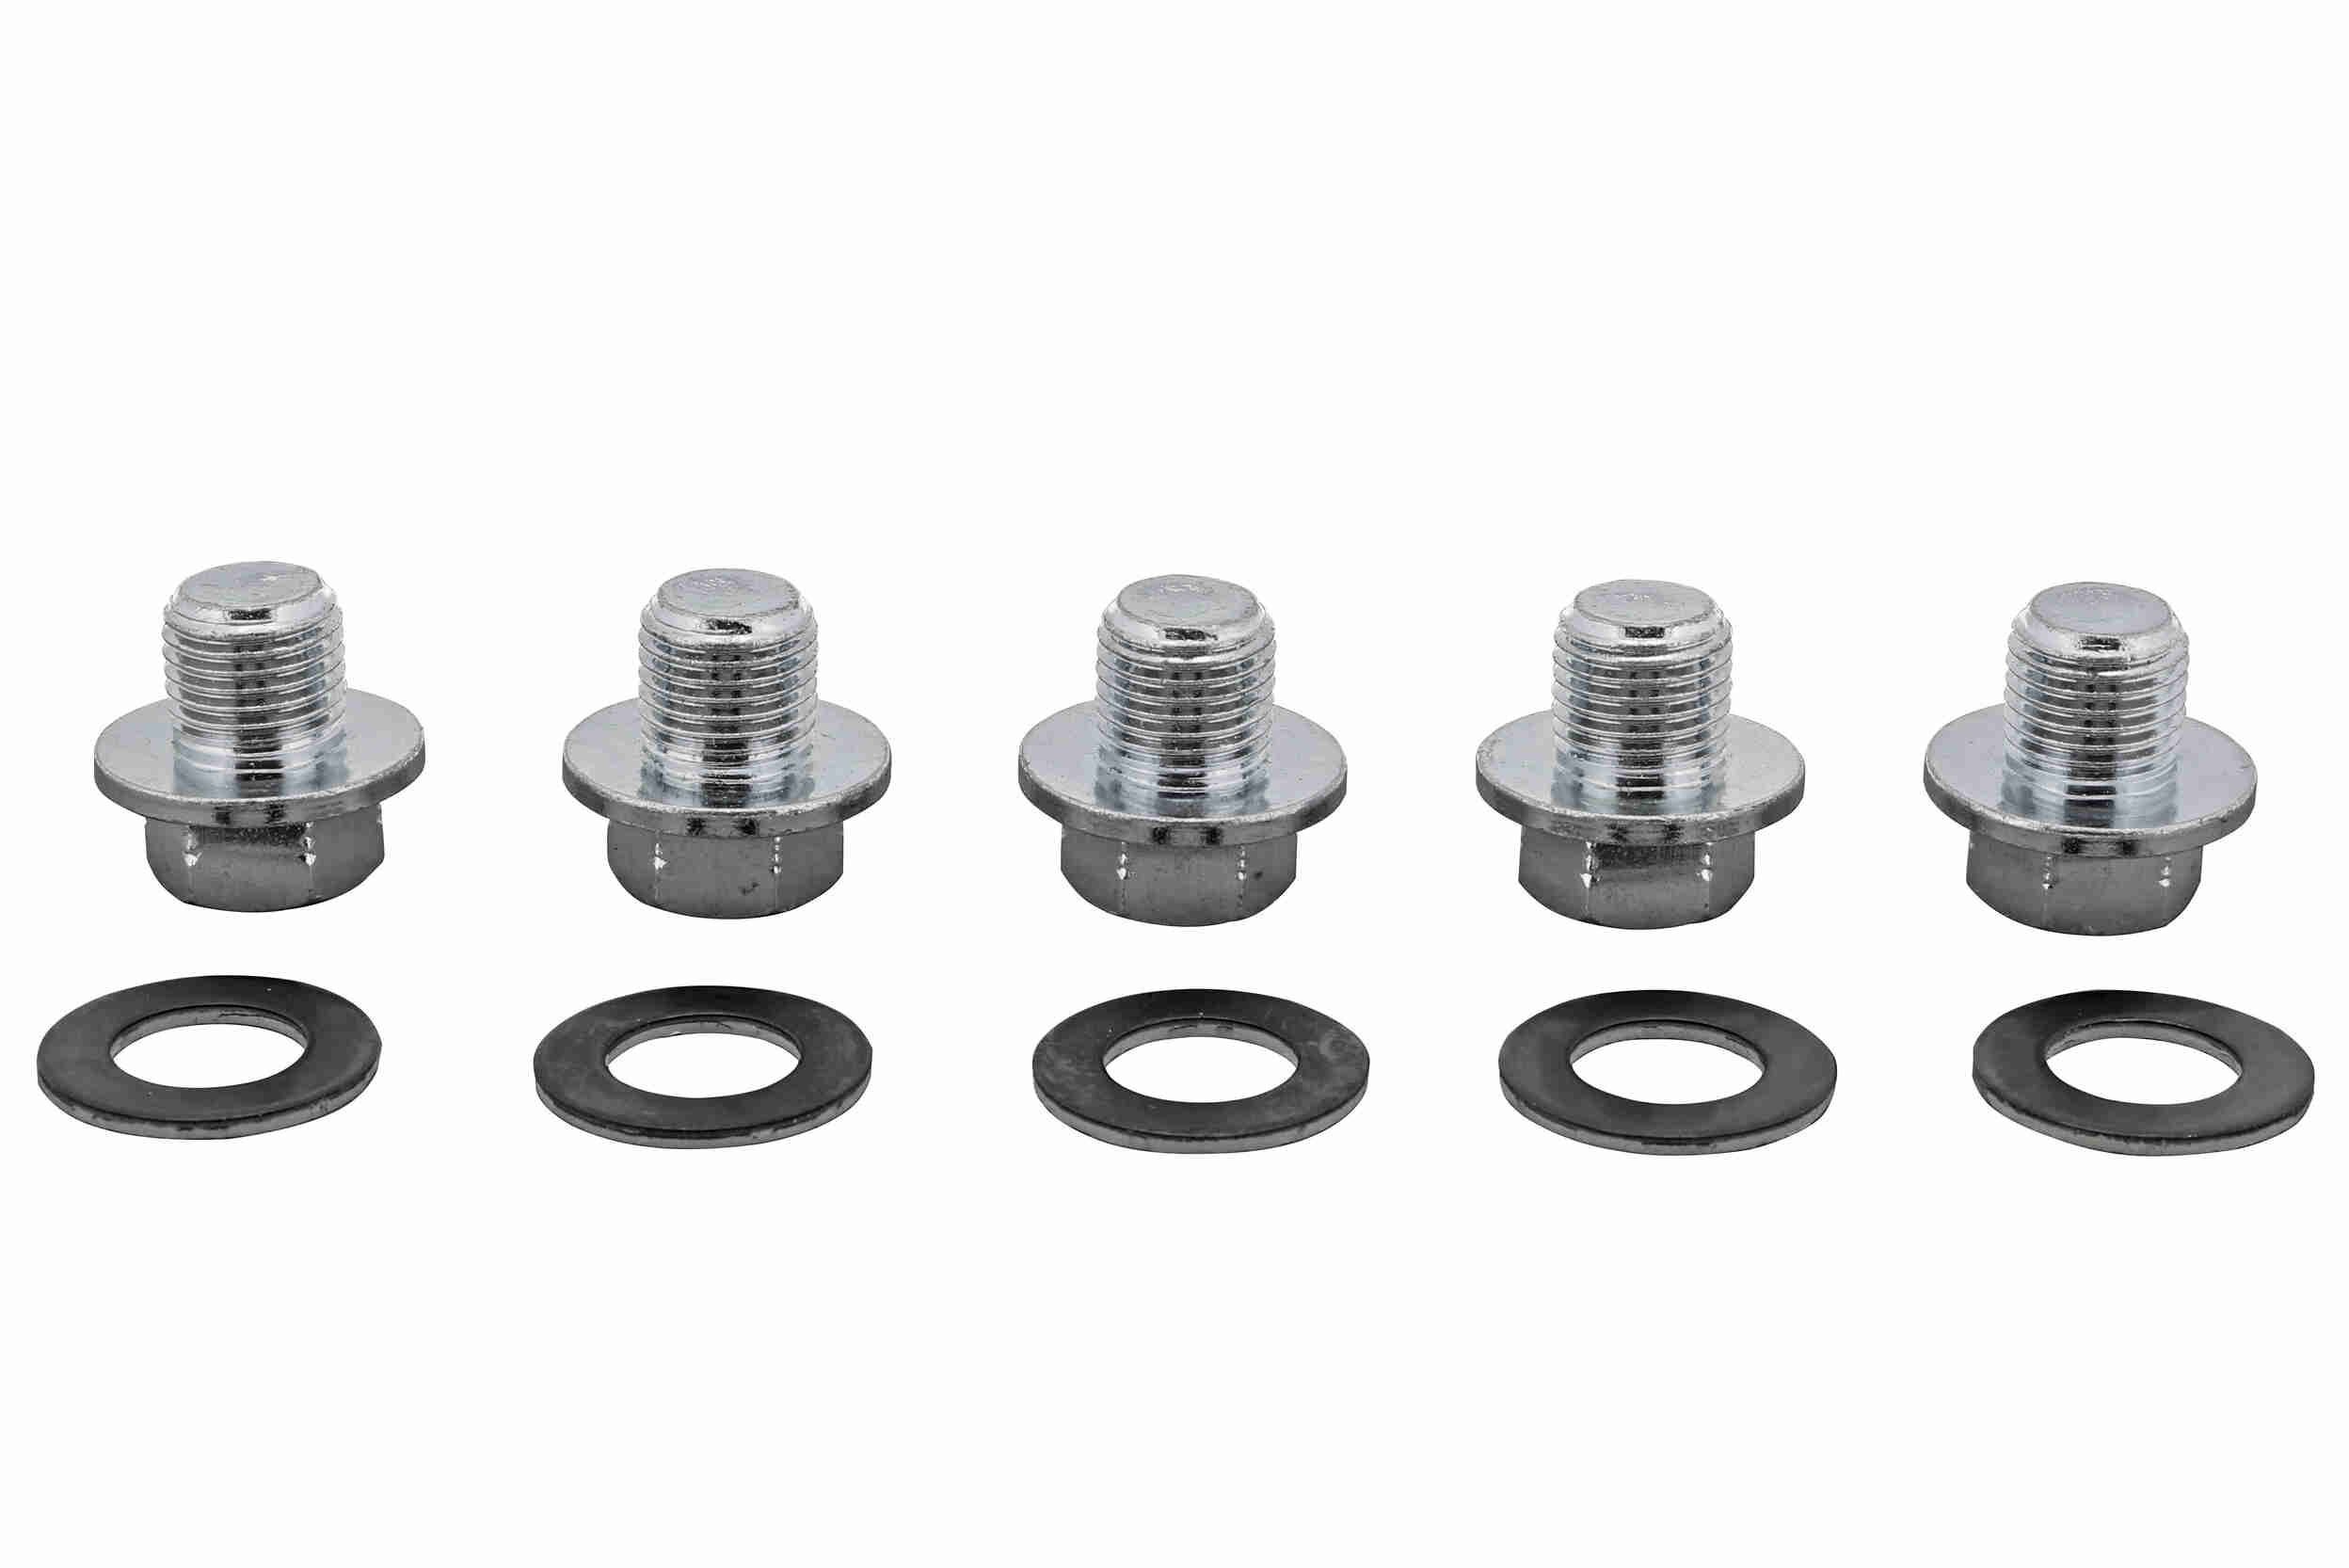 ACKOJA A70-0114 Sealing Plug, oil sump M12 x 1,25mm, M12 x 1,25, Steel, Spanner Size: 14, with seal ring